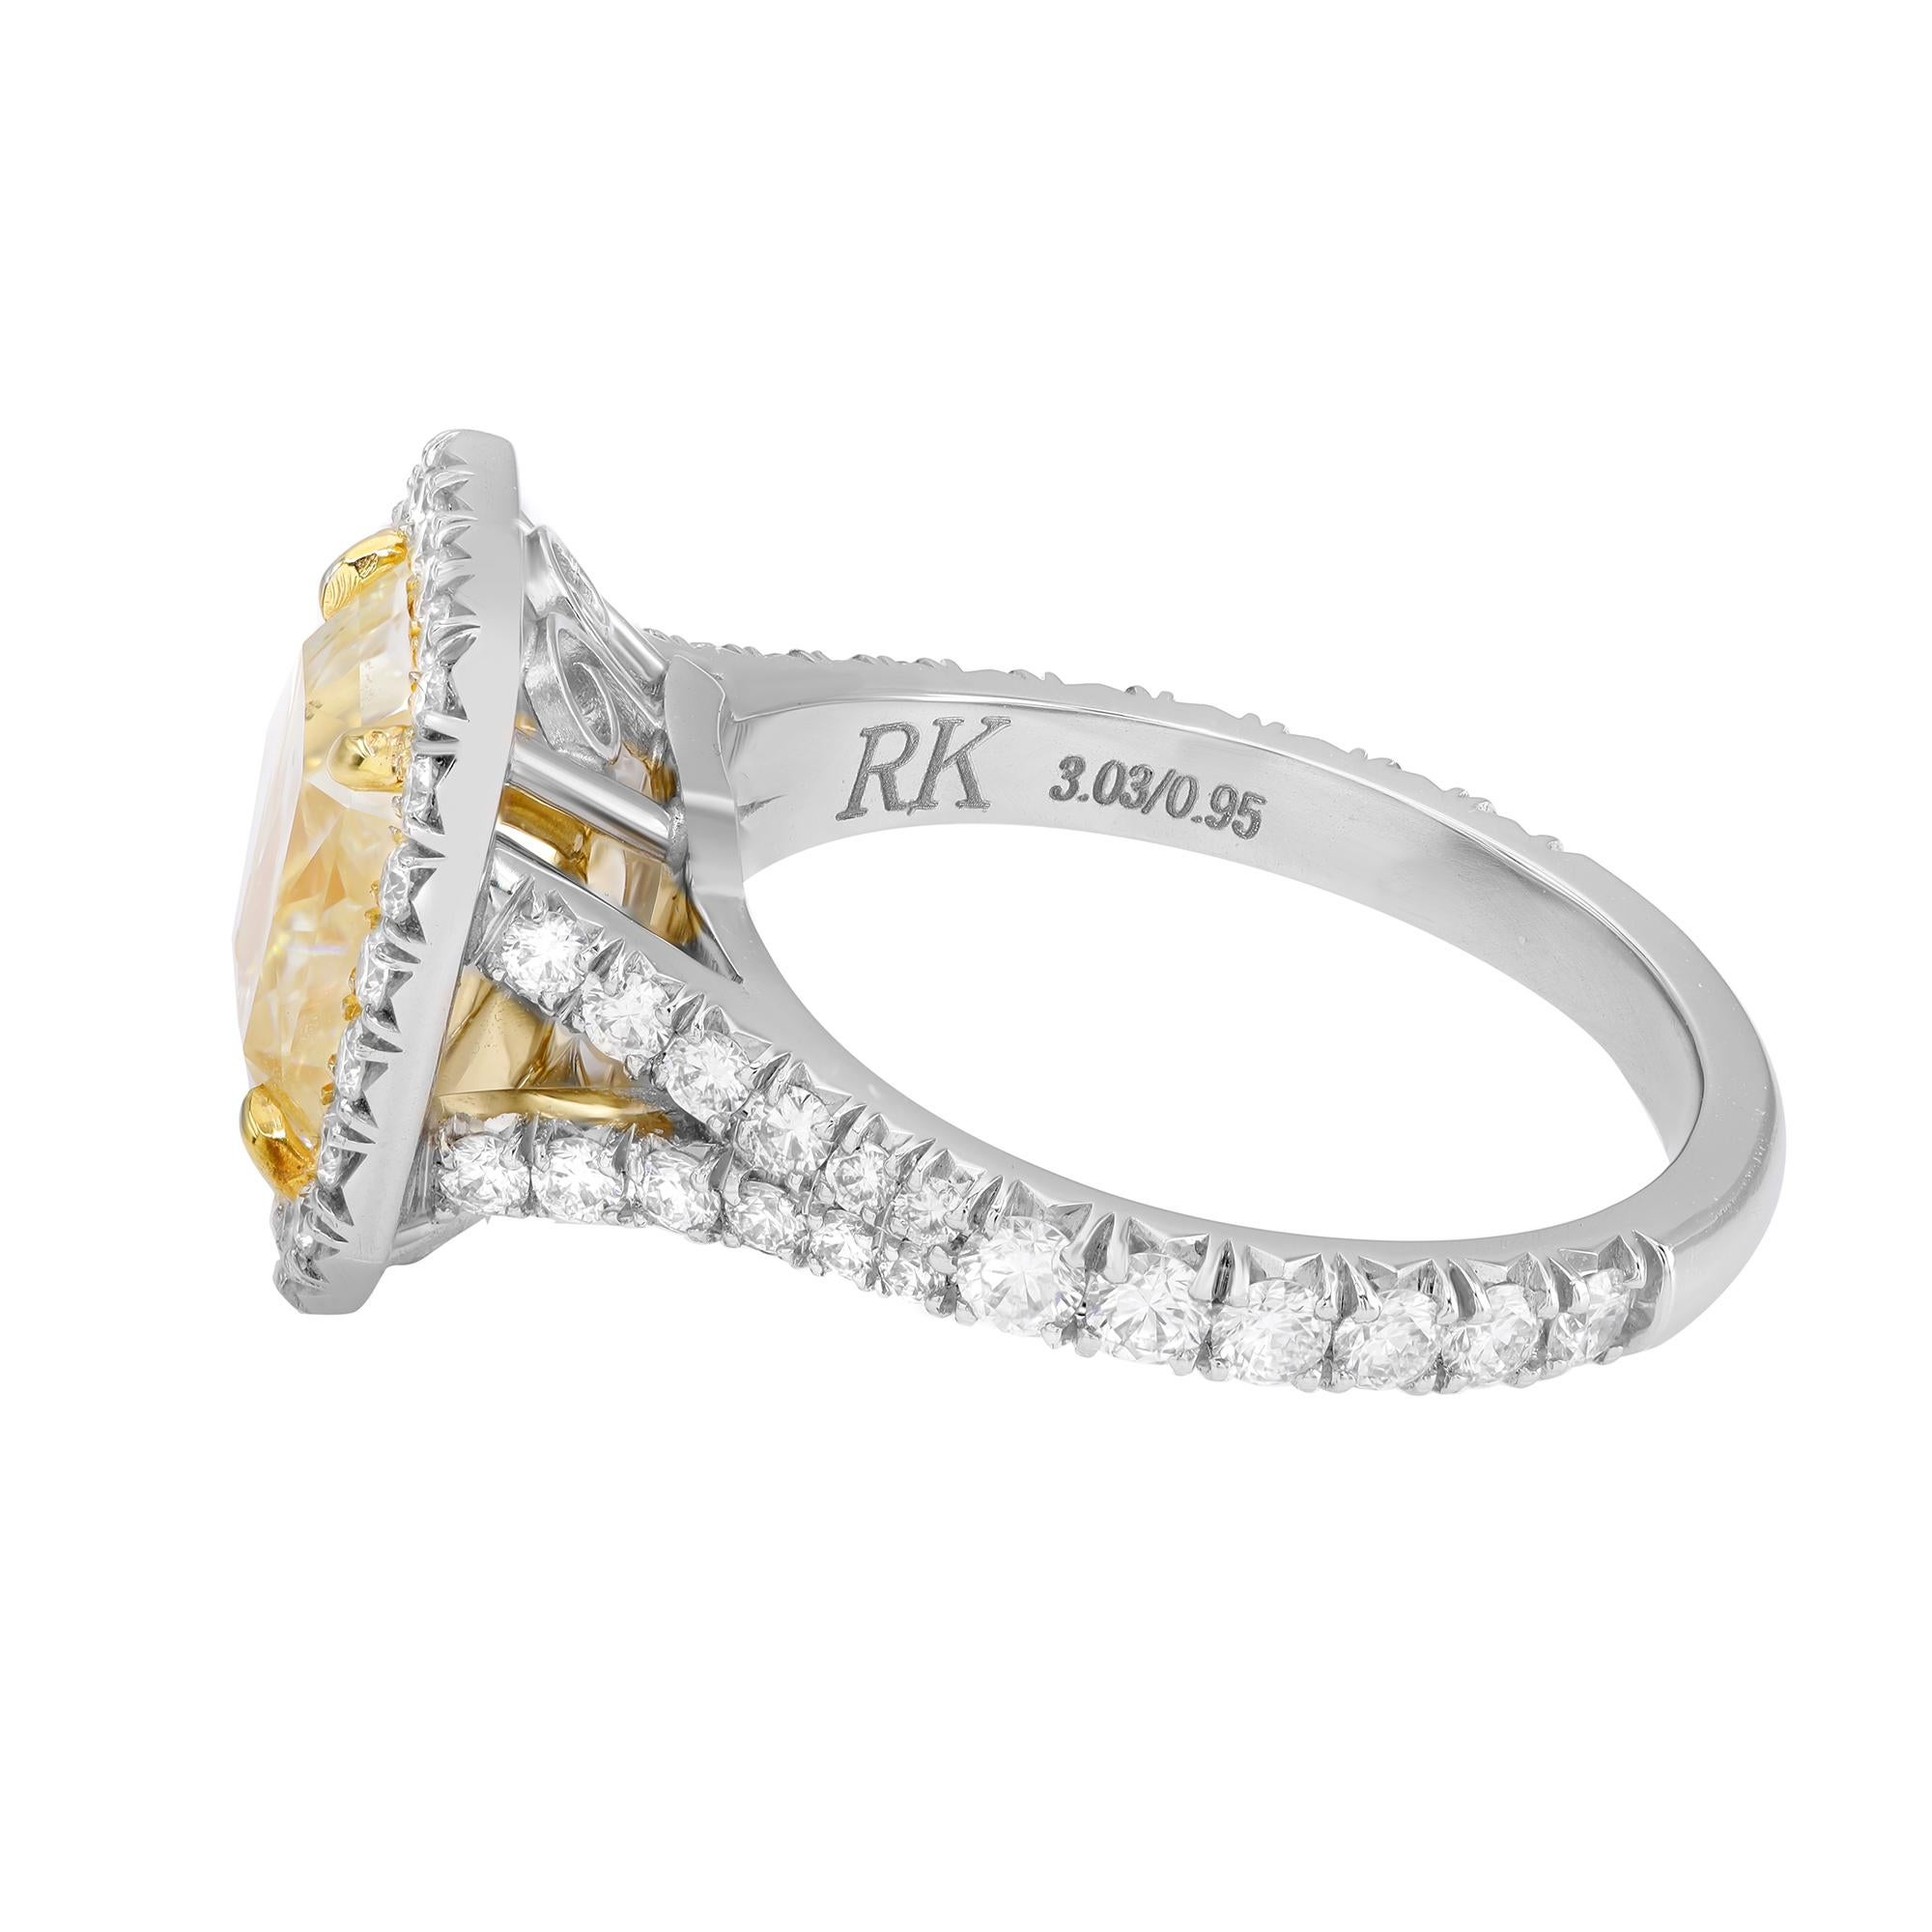 Brilliant Cut Natural Light Yellow Brilliant Diamond Halo Engagement Ring Platinum 3.03cts GIA For Sale